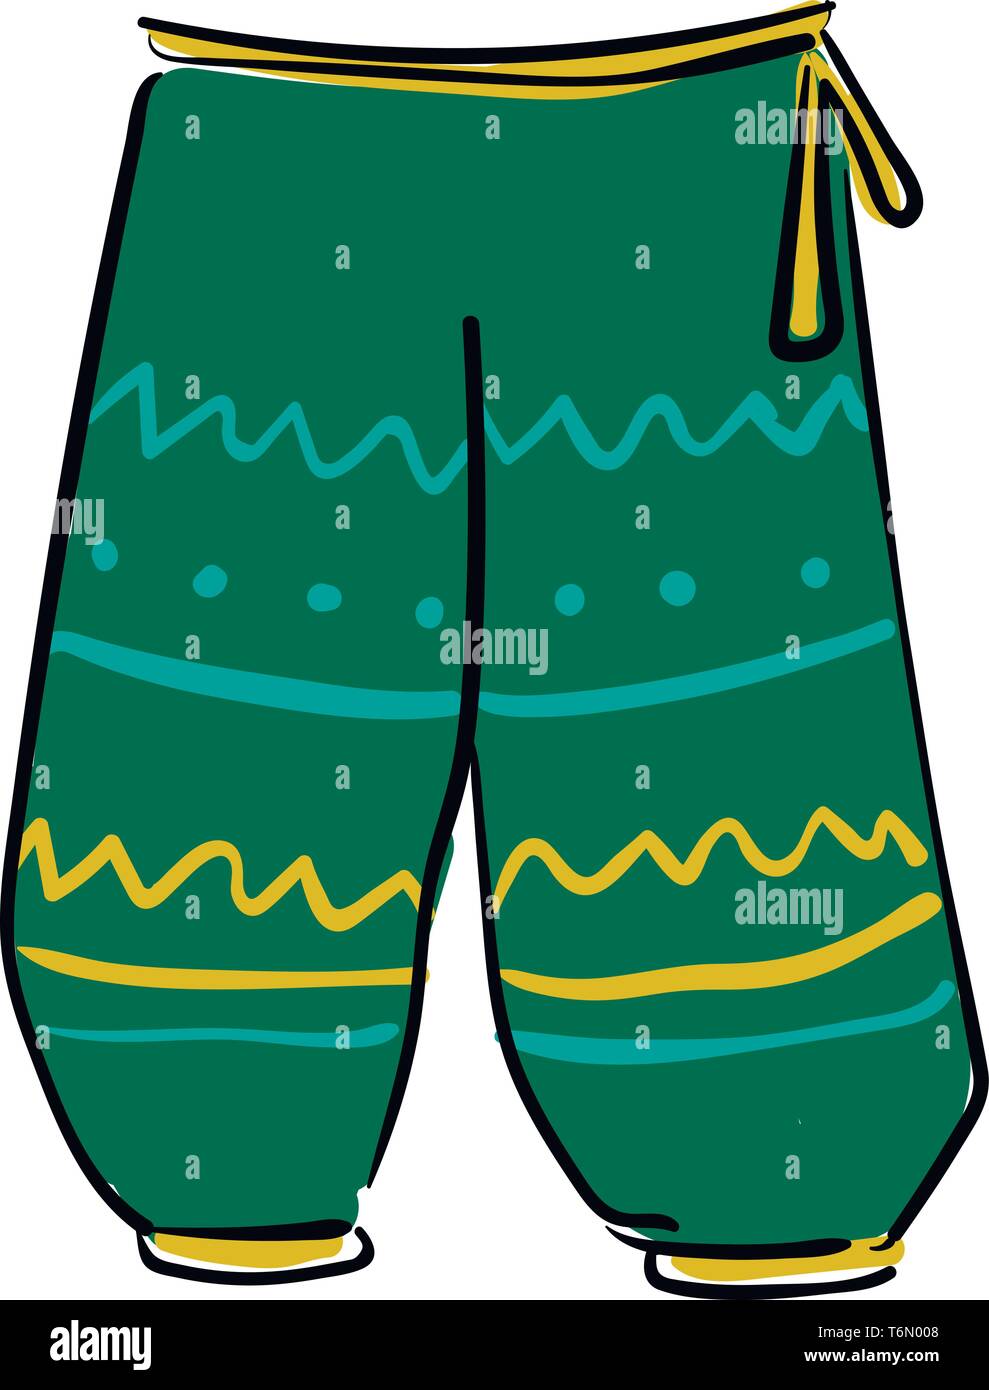 A stylish green Aladdin pants with cool blue and yellow works on it which is very flexible vector color drawing or illustration Stock Vector